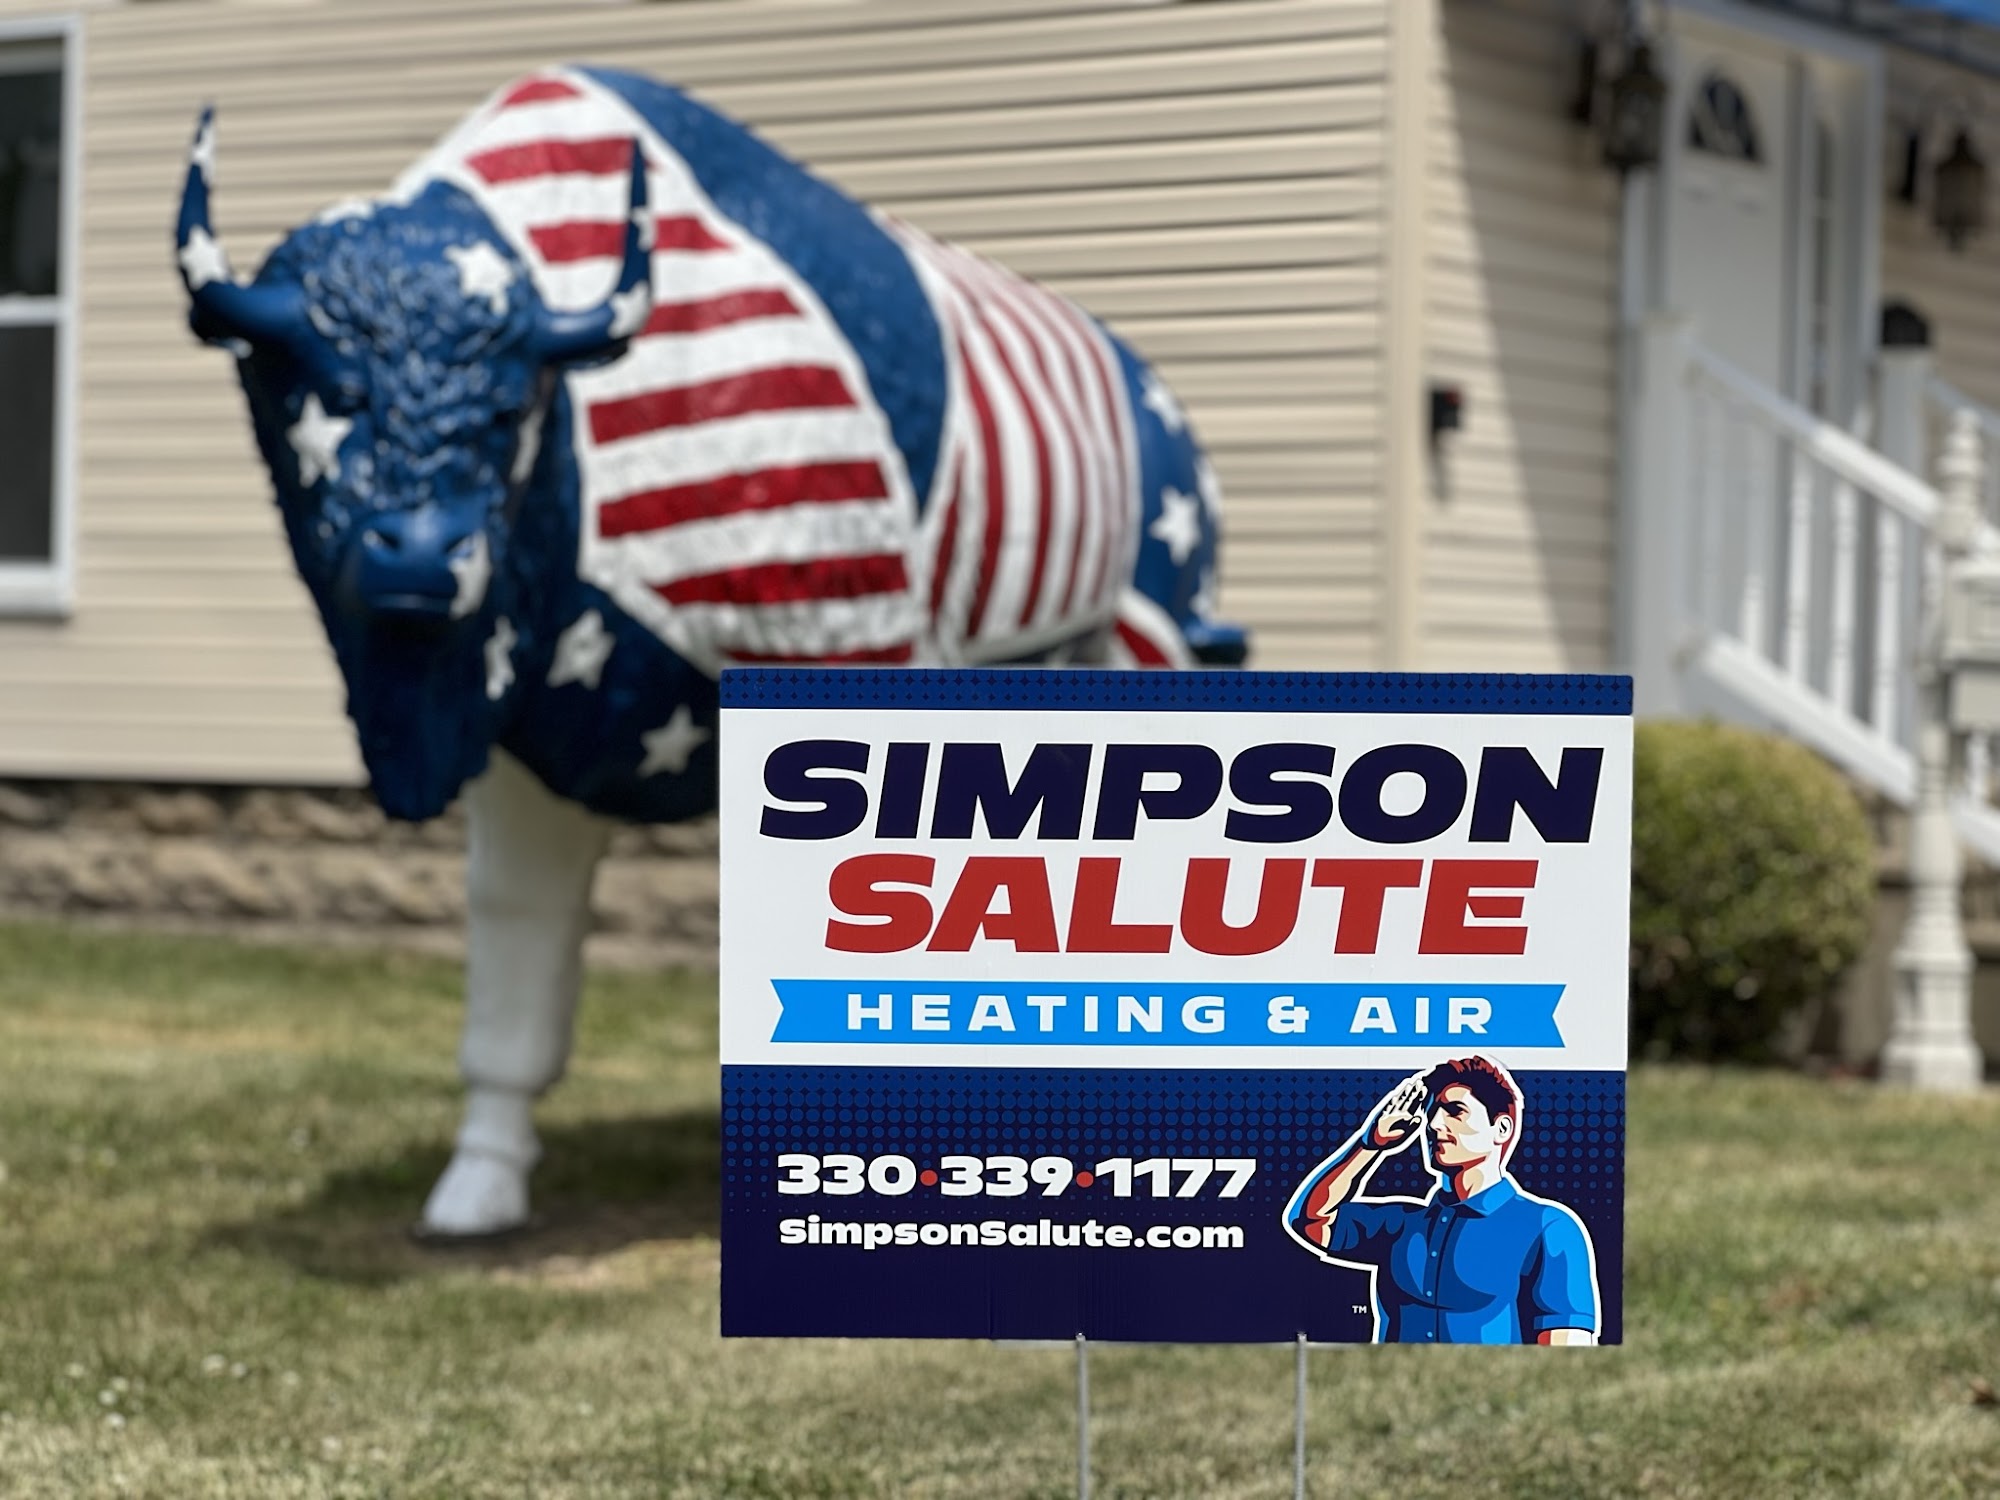 Simpson Salute Heating and Air